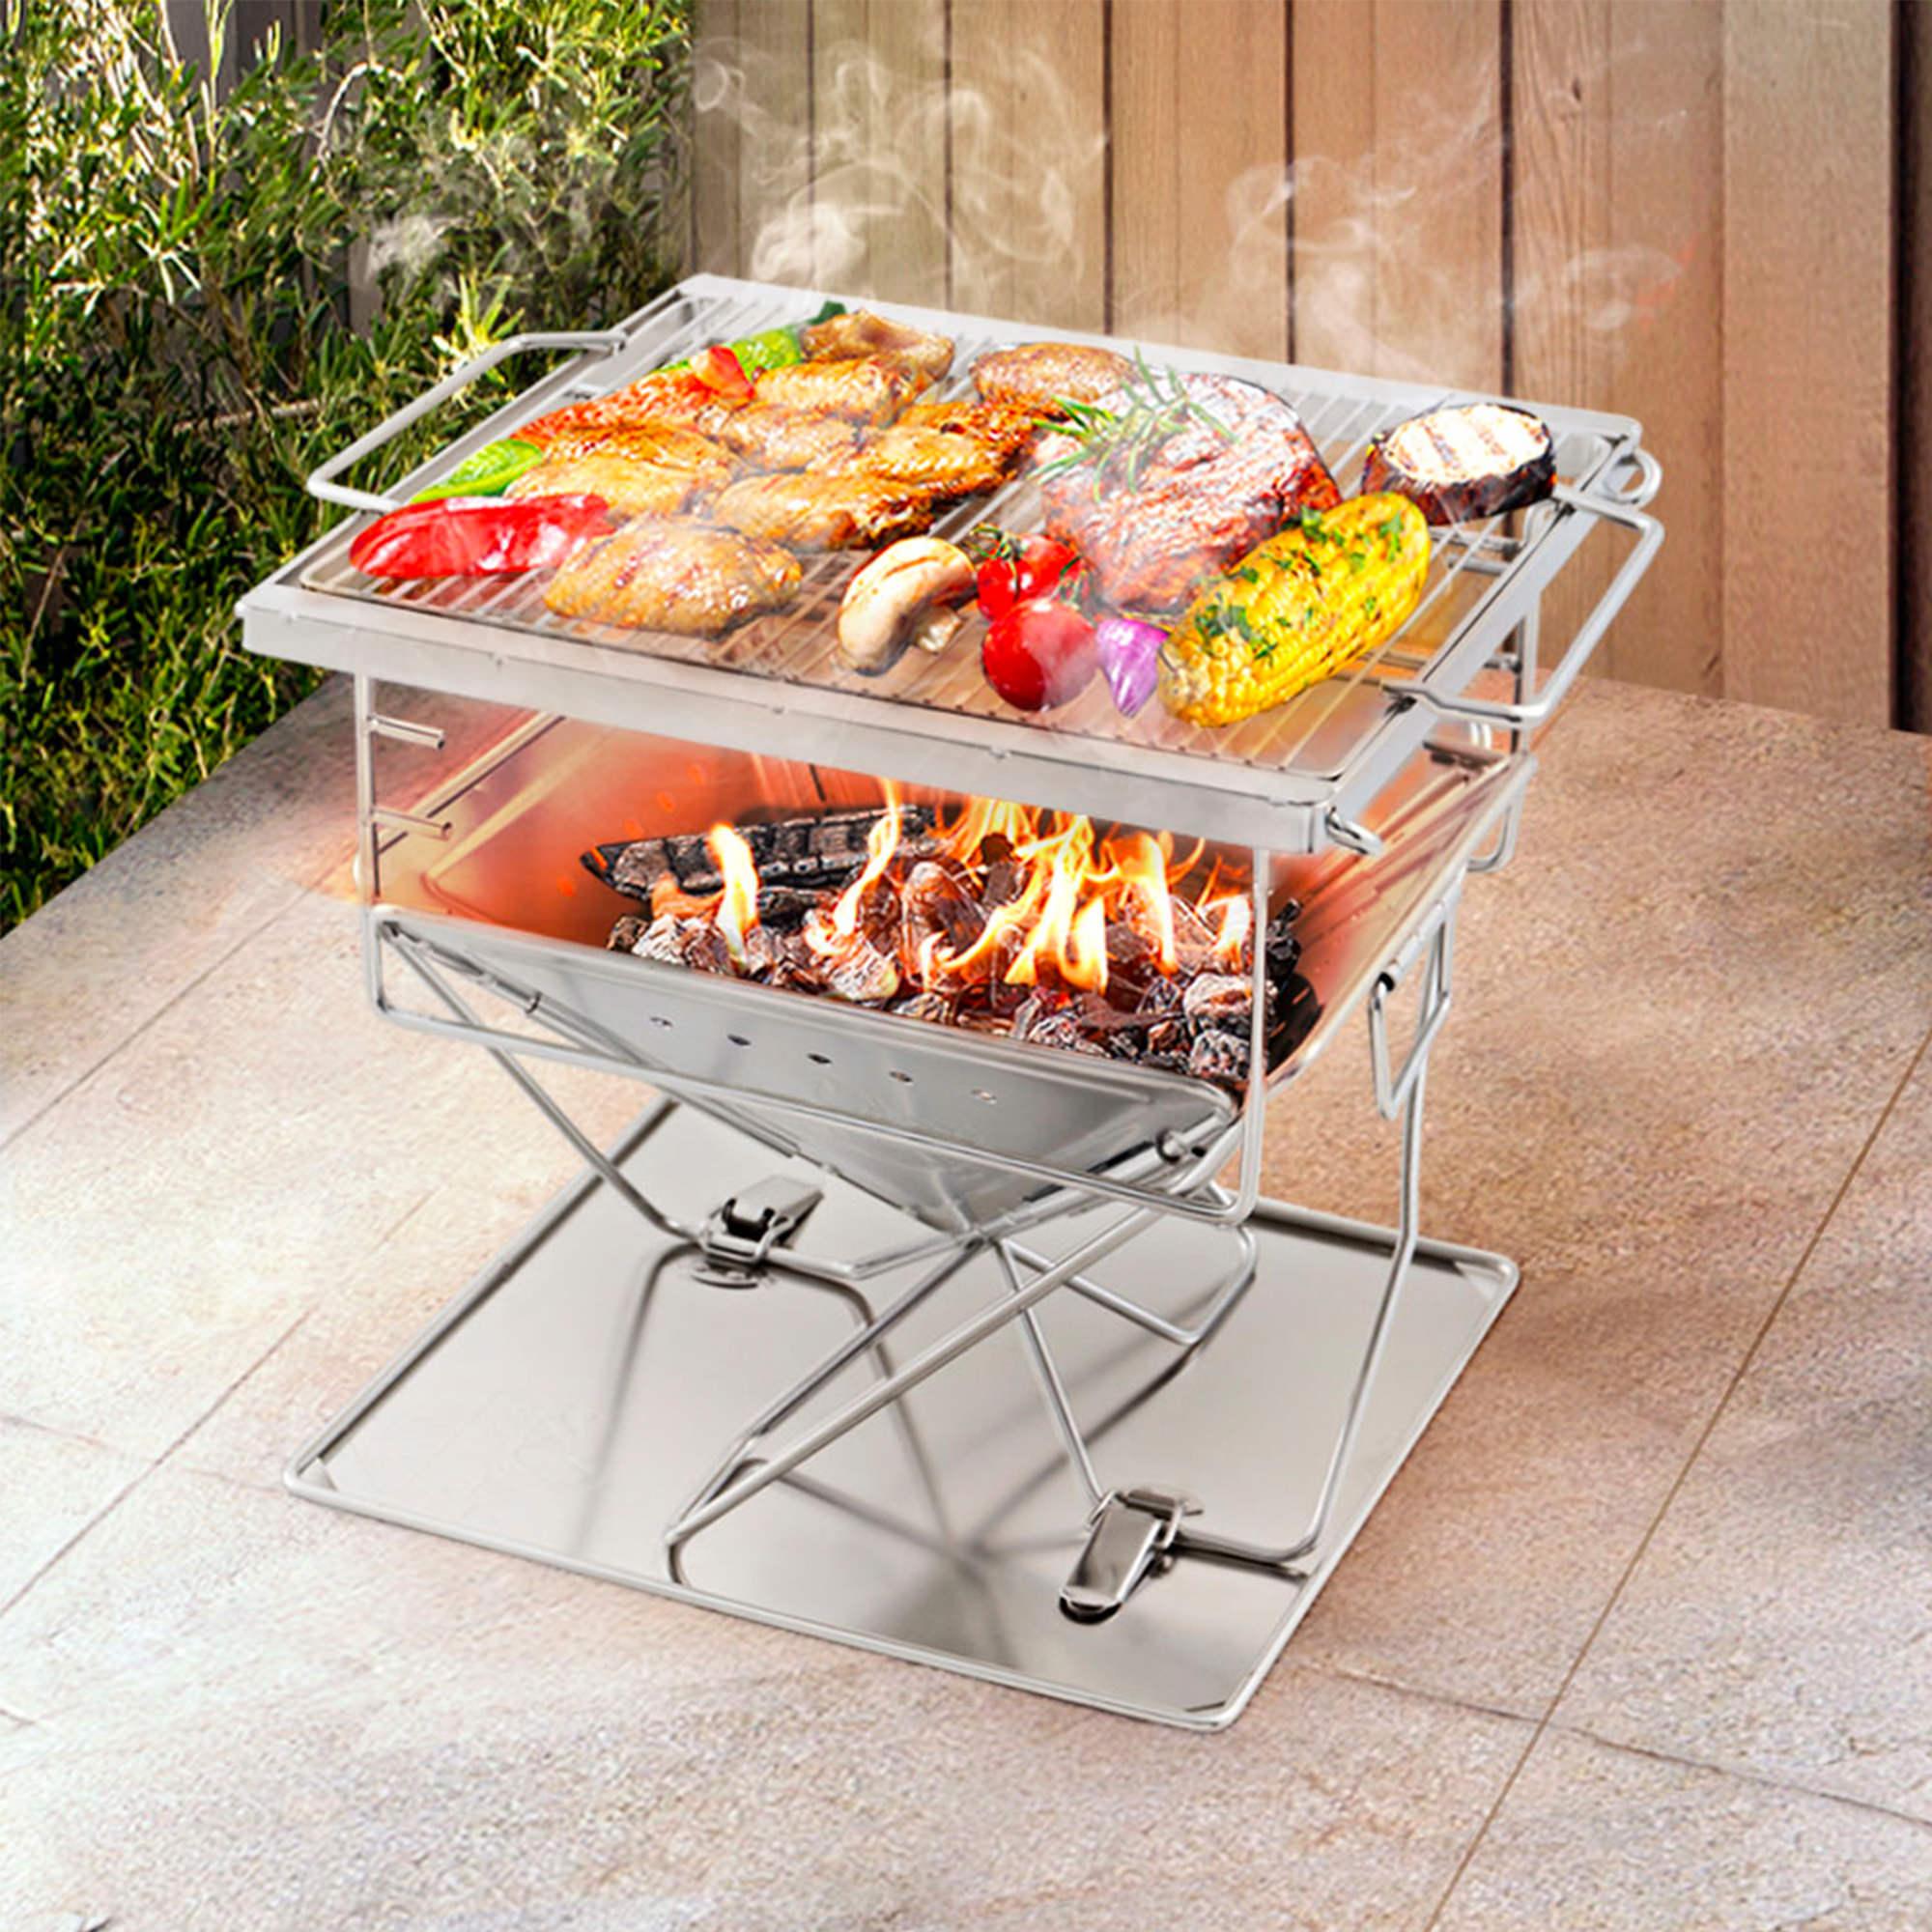 Grillz Stainless Steel Portable Fire Pit and BBQ with Carry Bag Image 2